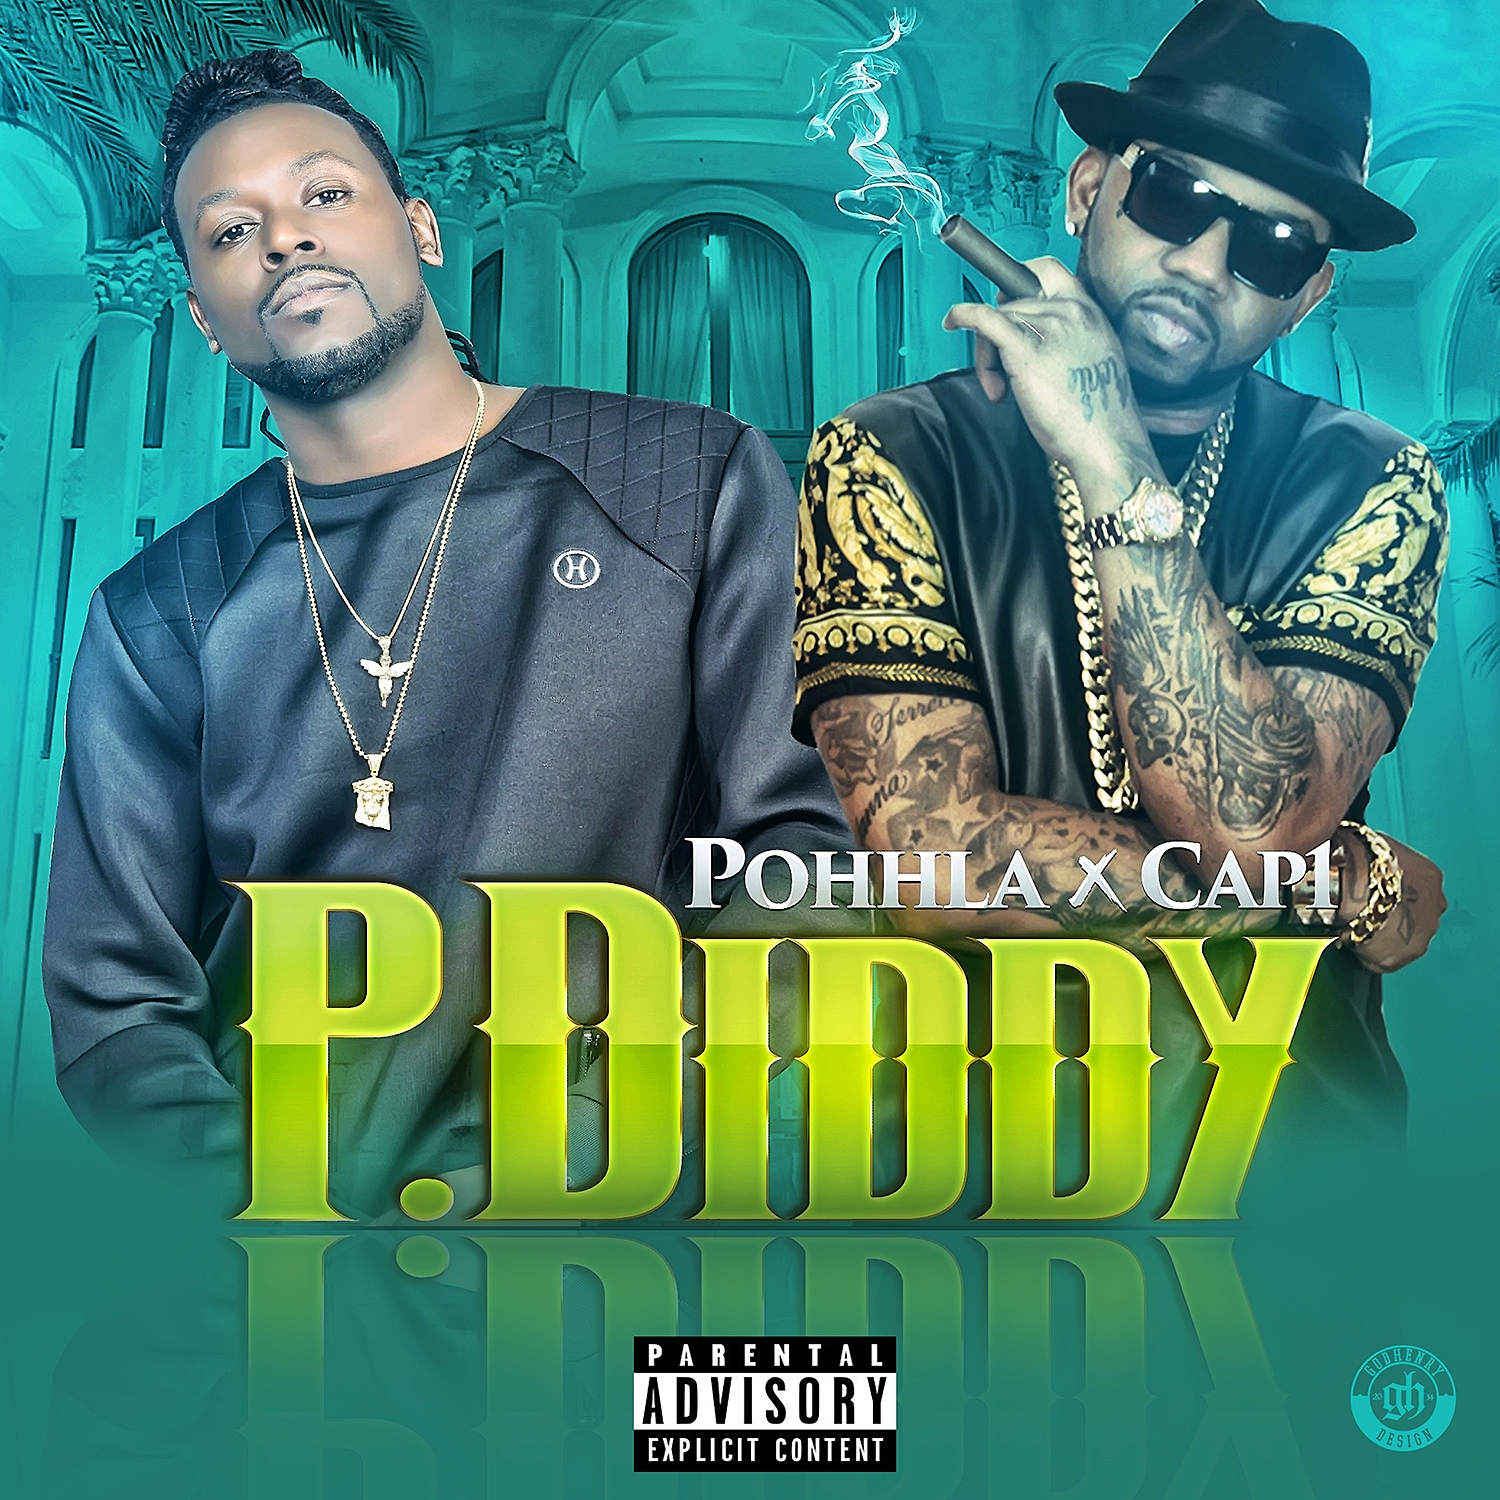 P.Diddy (feat. Cap 1) - Single